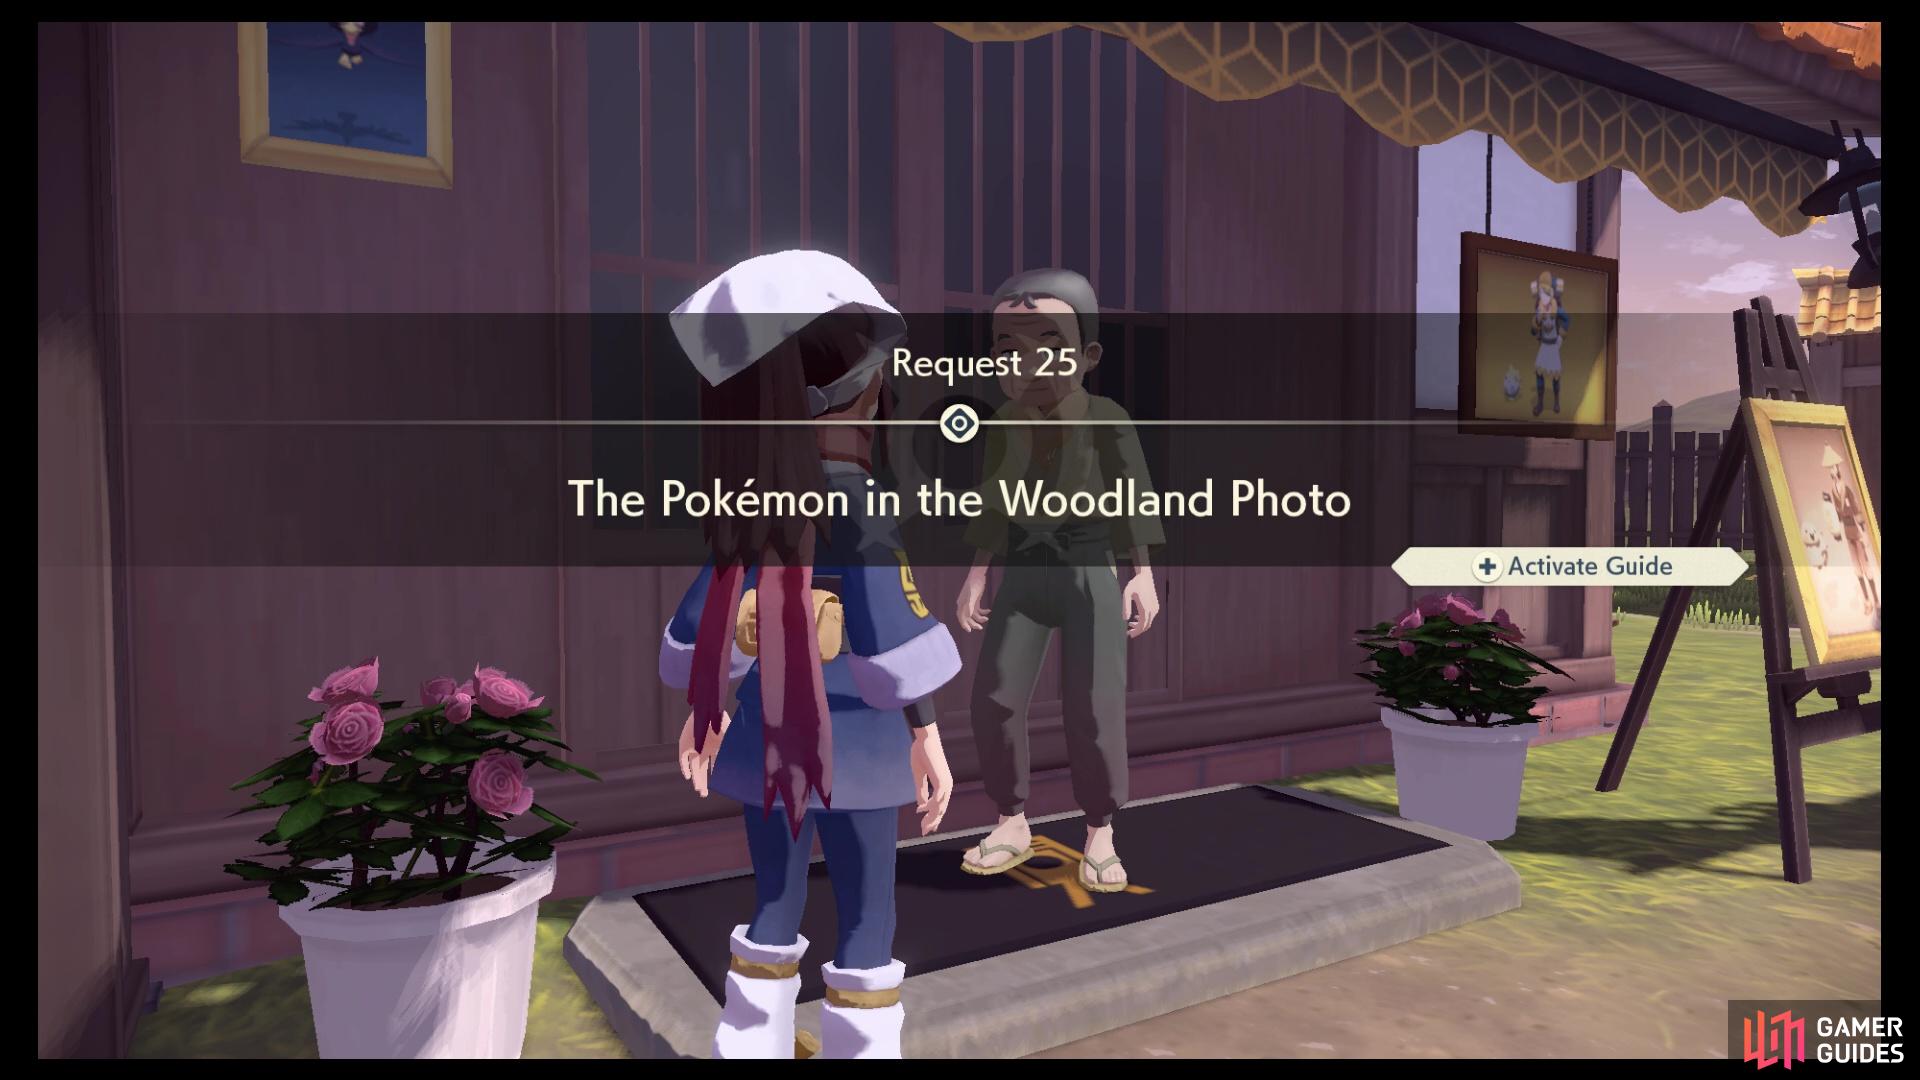 Request 25: The Pokémon in the Woodland Photo.